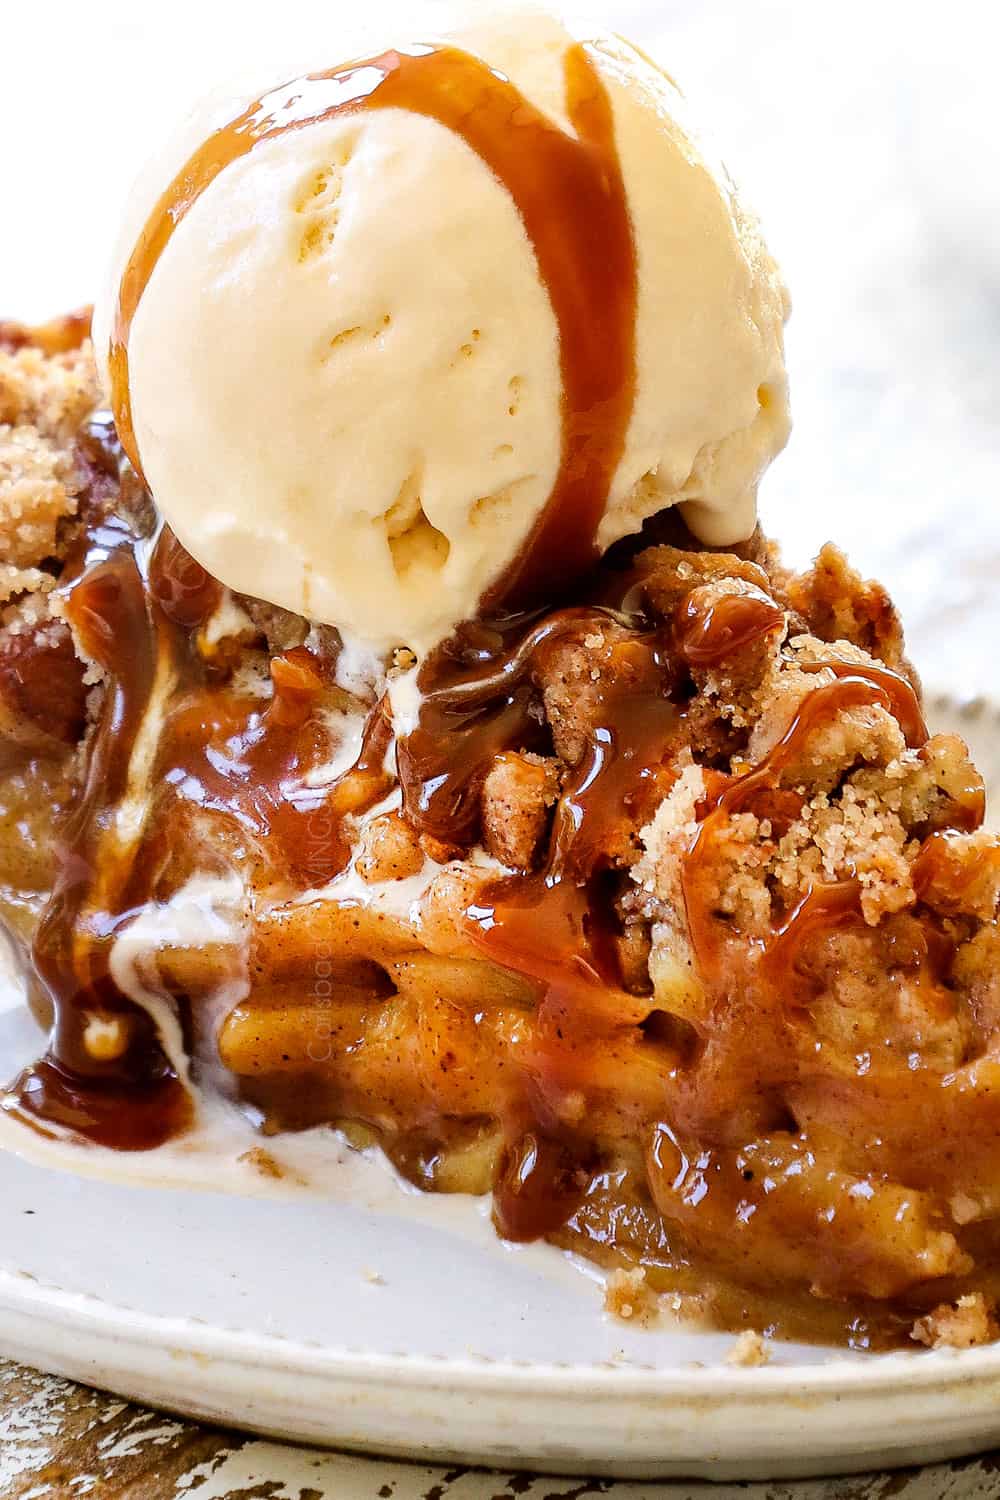 up close of a slice of Dutch Apple Pie (Apple Crumble Pie) with crumble topping and ice cream